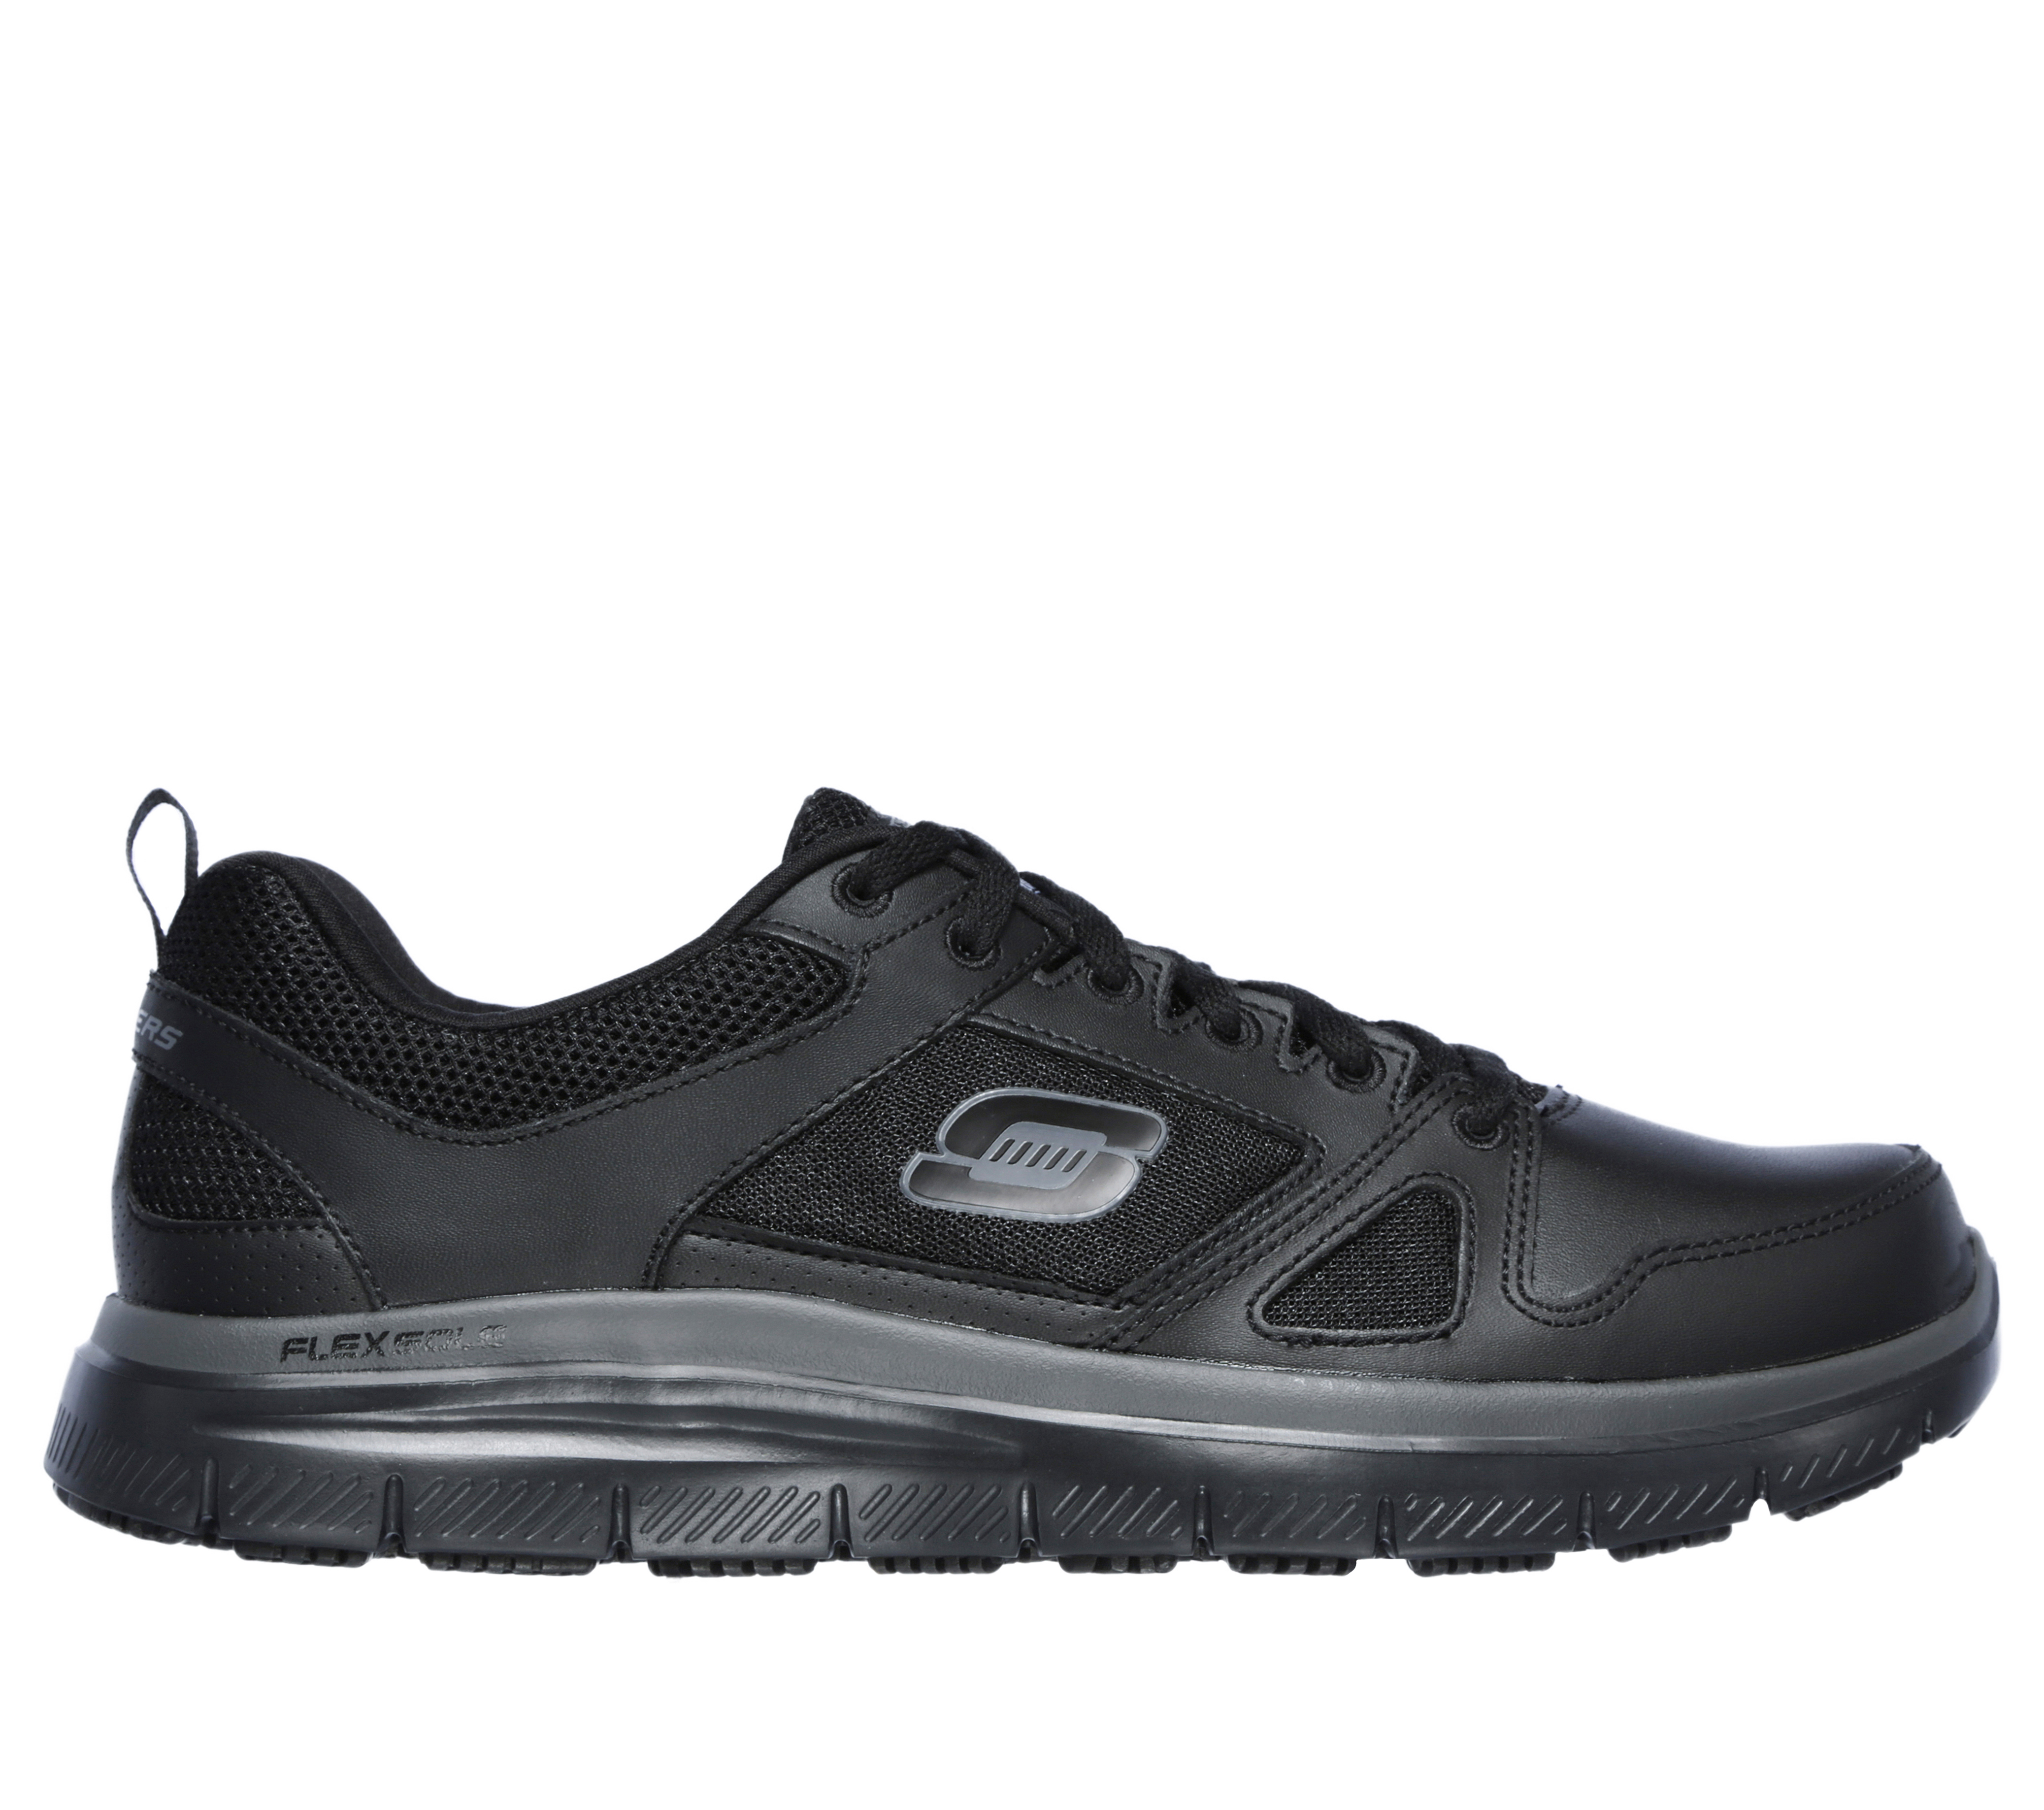 skechers safety shoes for women